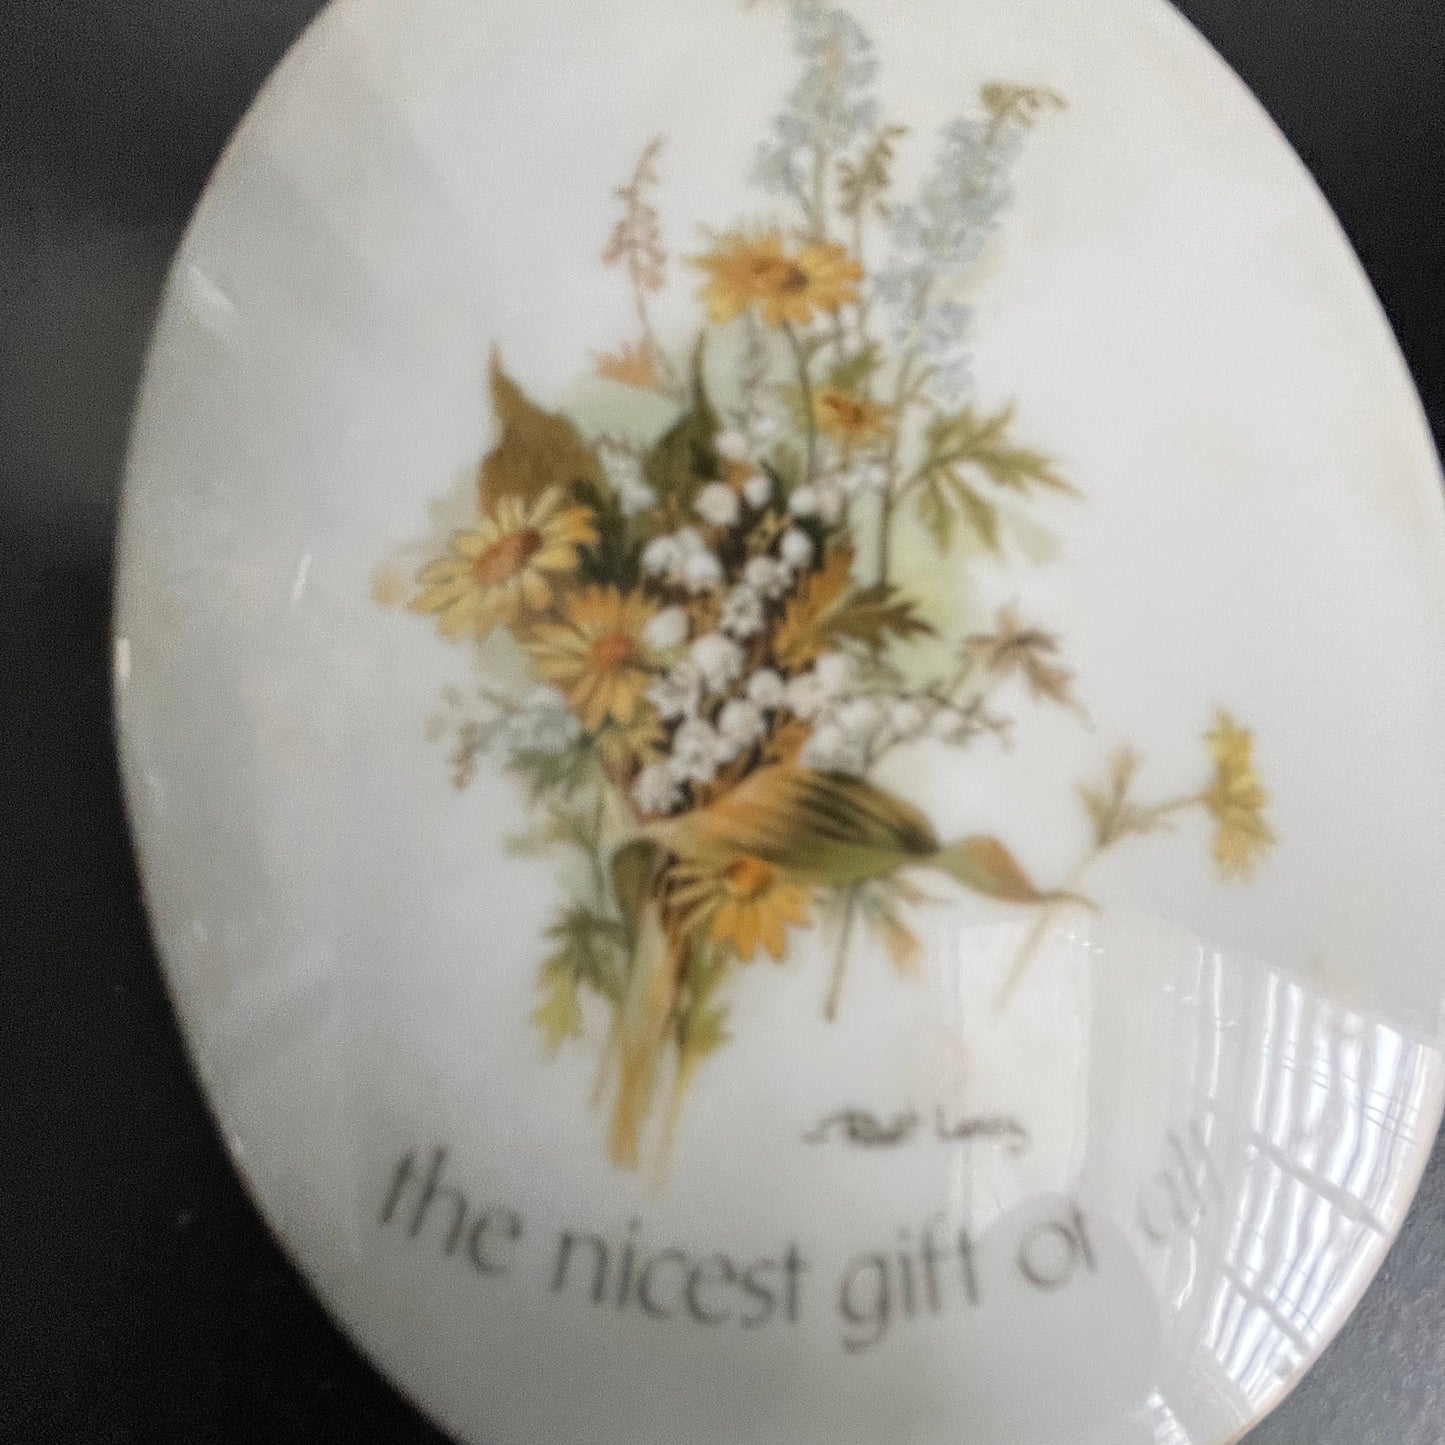 Floral Sentiments Love Is the nicest gift of All 4.5 inch Porcelain Collectible Wall Hanging